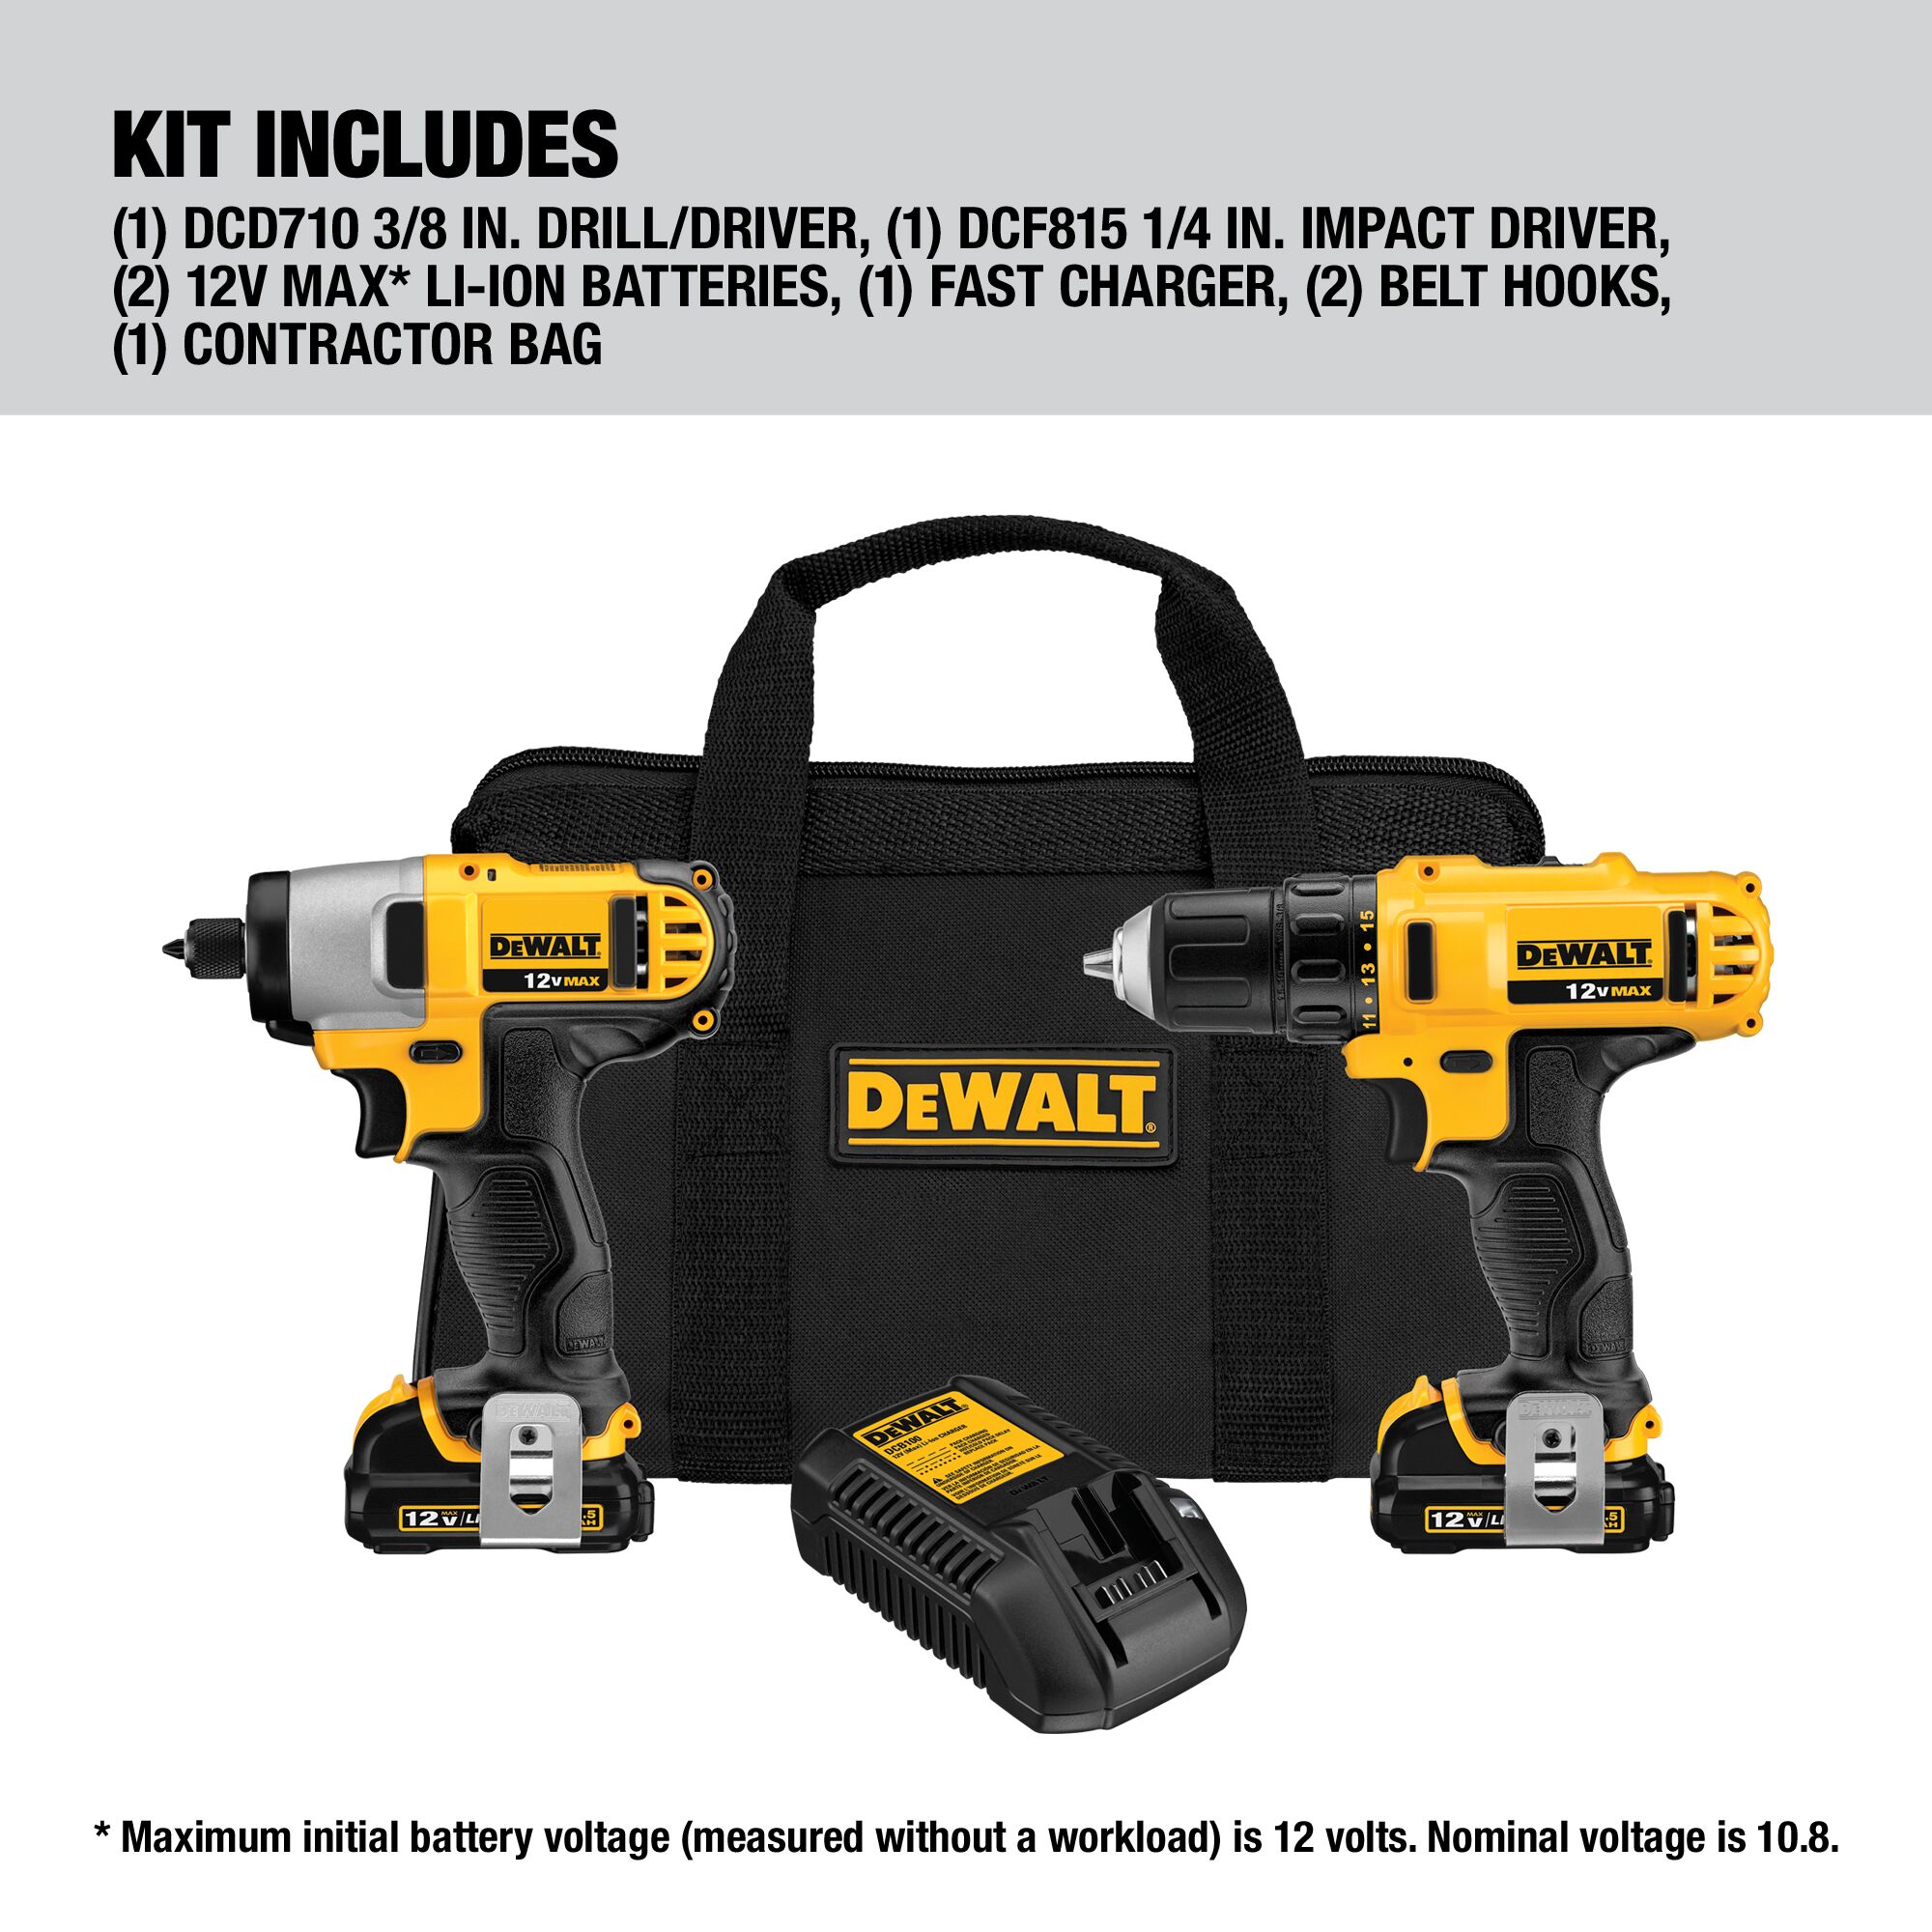 DeWALT COMBO and Black + Decker, the Difference 